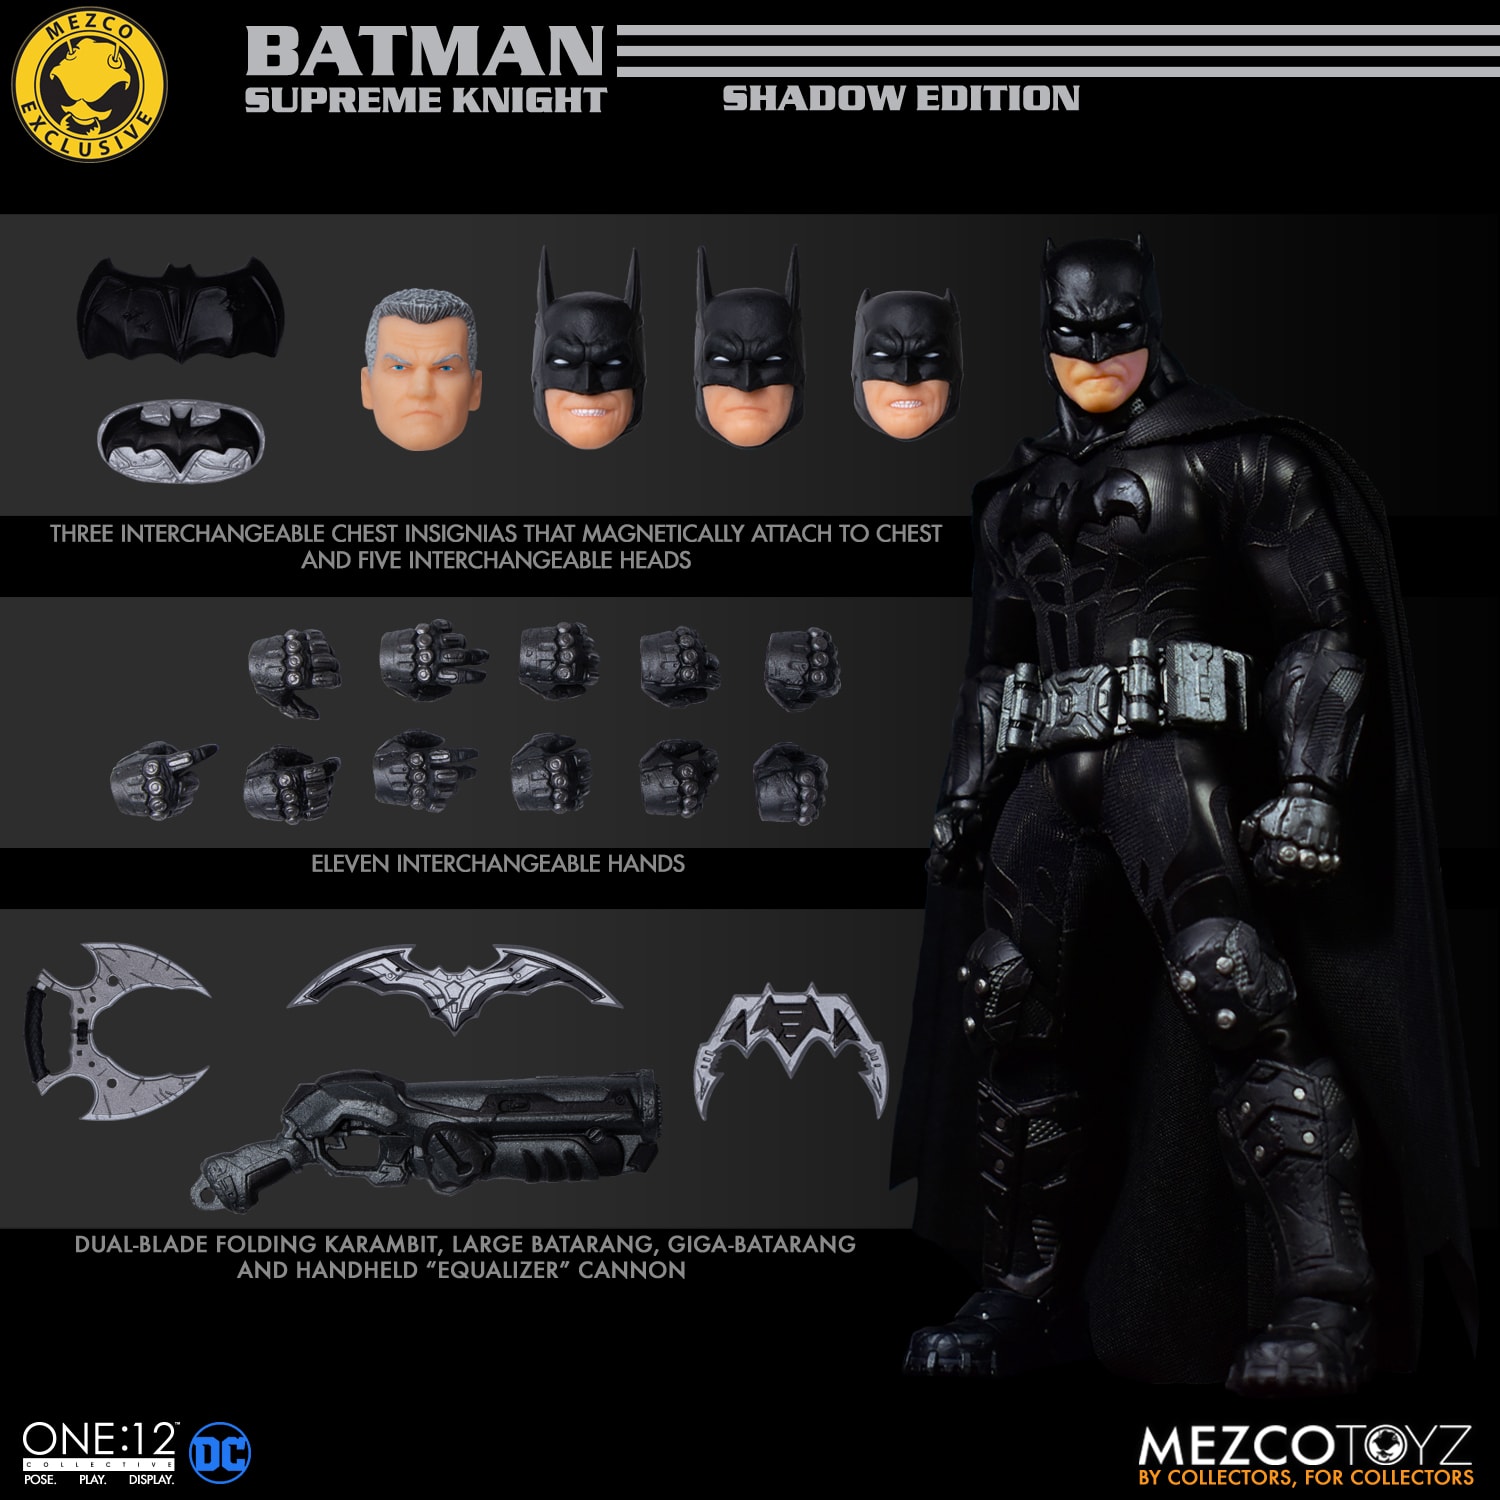 Details about   Mezco One:12 MDX Batman Old Bruce Wayne Supreme Knight Shadow Limited Edition 